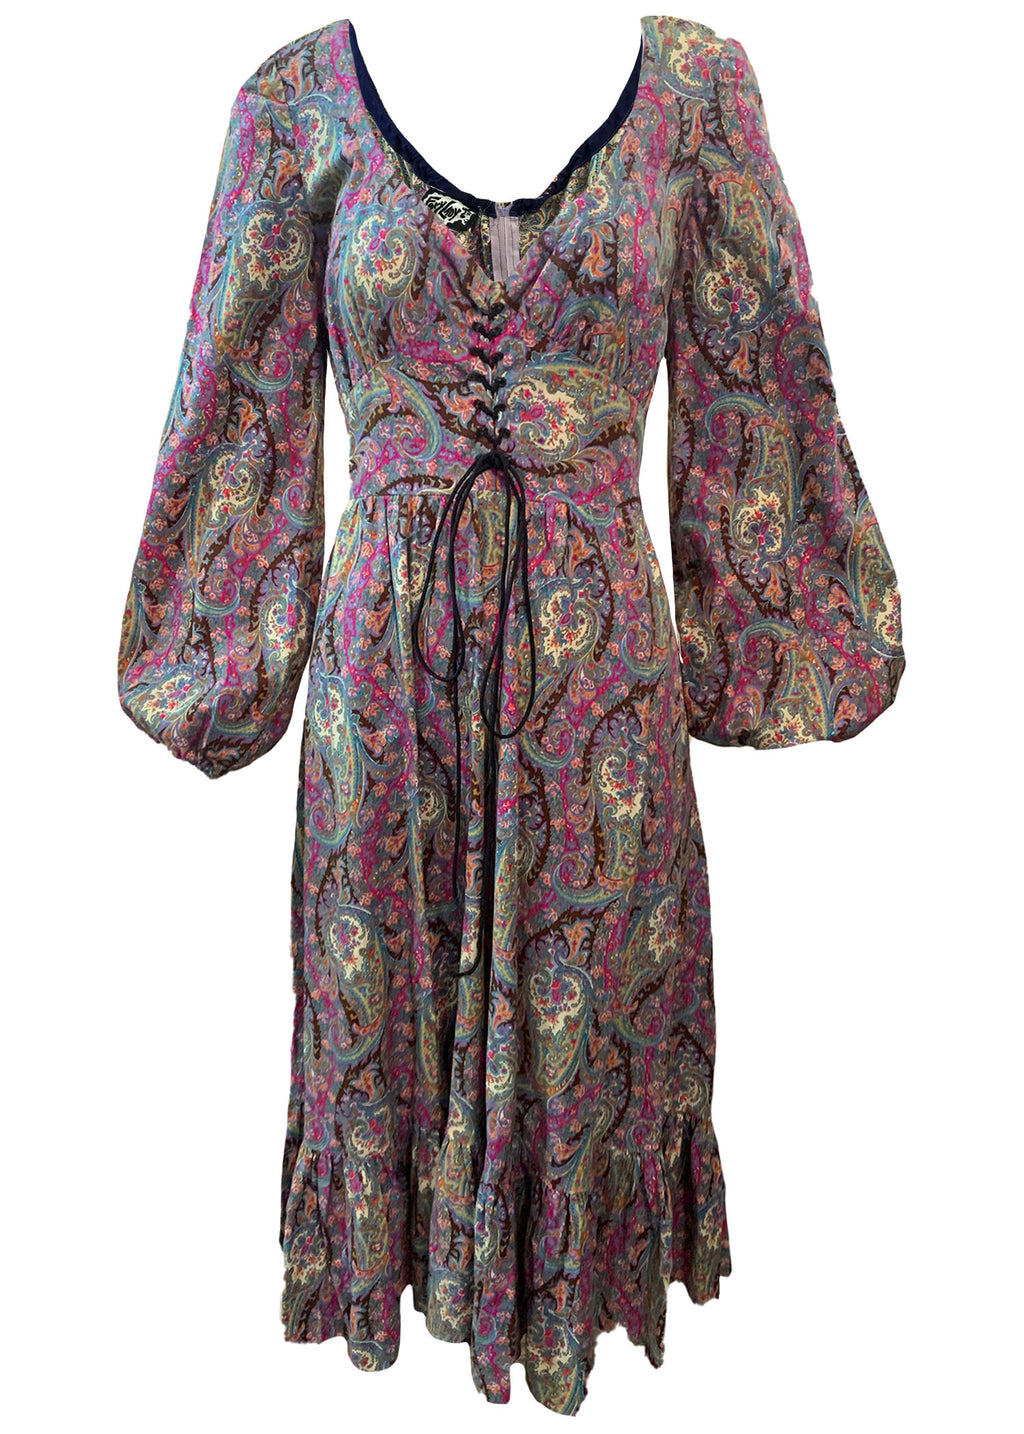 Foxy Lady 70s Paisley Peasant Hippie Dress FRONT 1 of 5